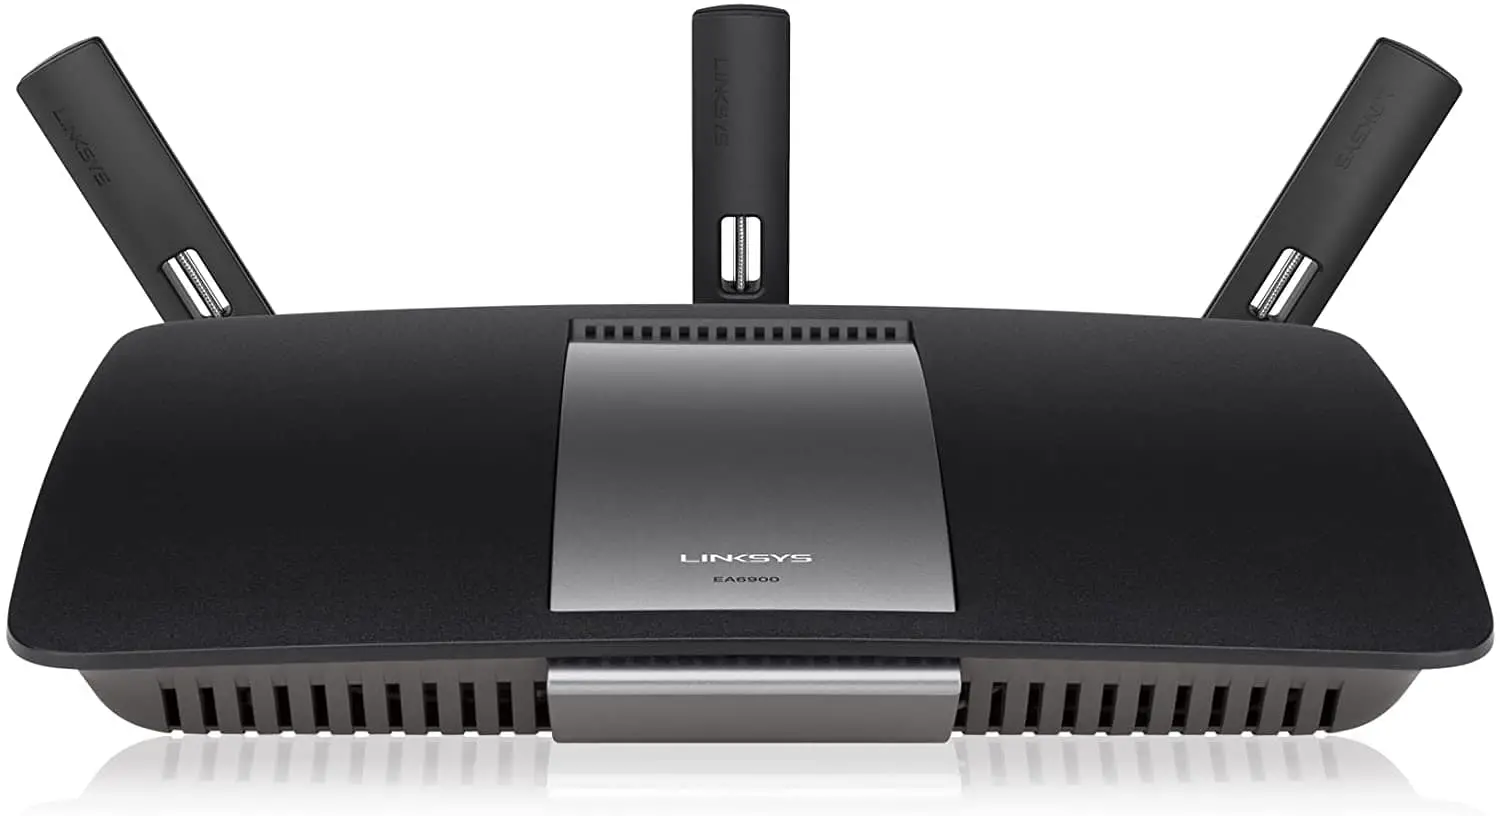 Linksys AC1900 Wi-Fi Dual-Band Router (EA6900)